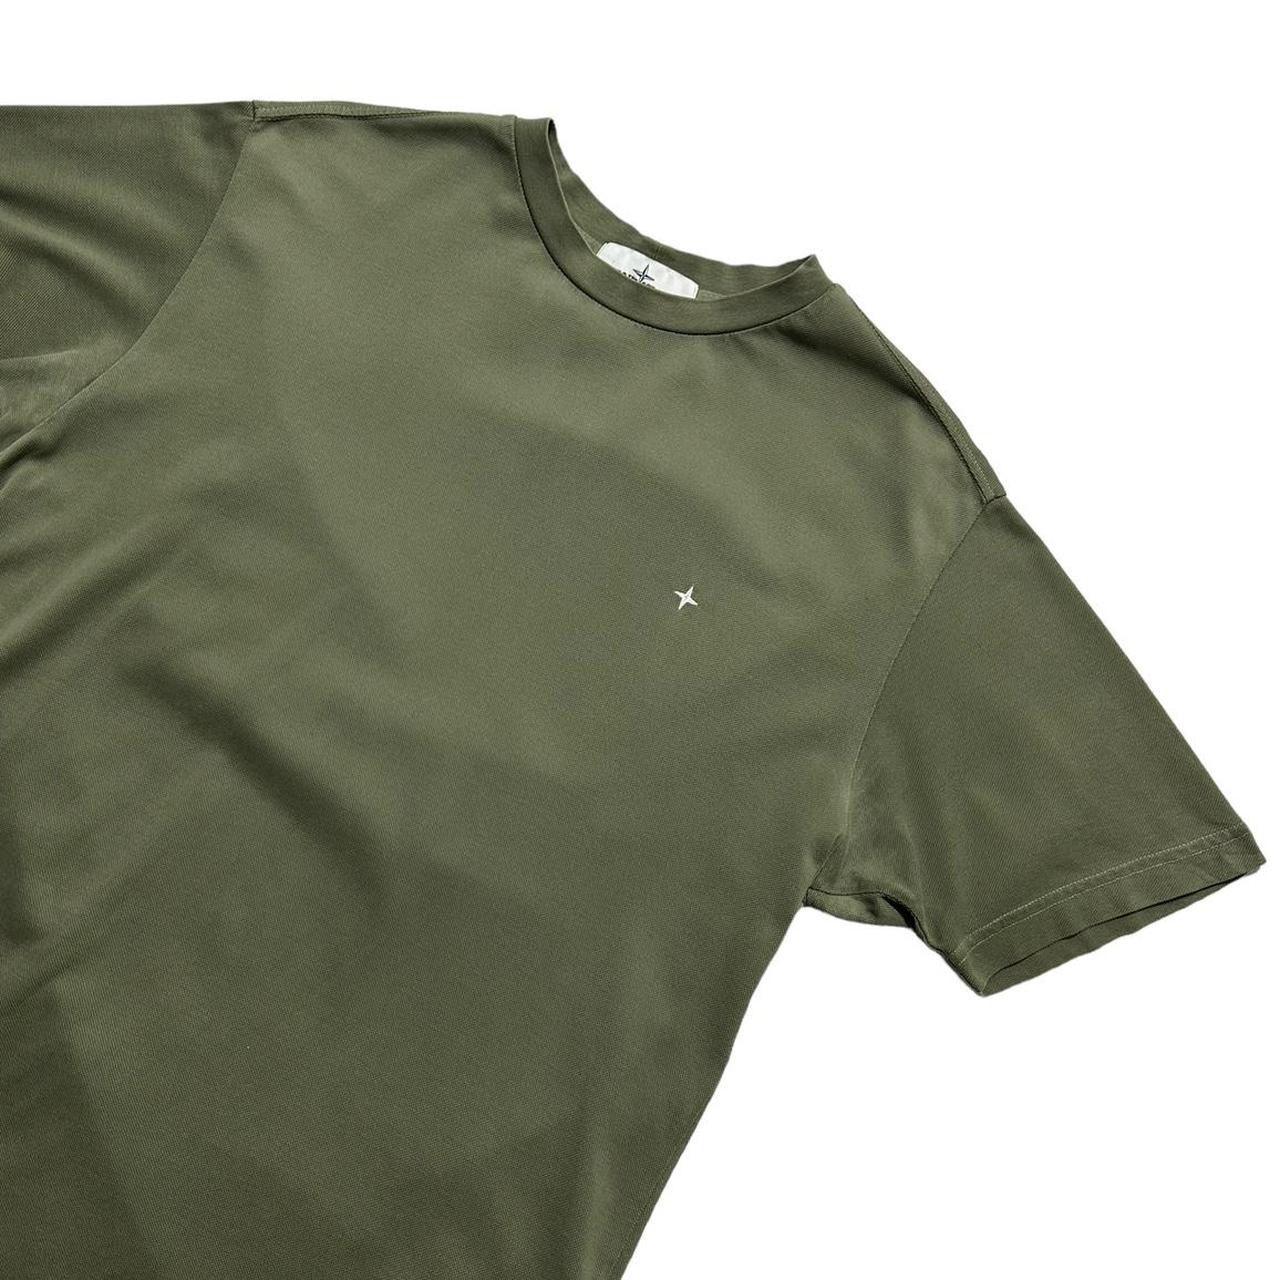 Stone Island Side Compass T-Shirt - Known Source